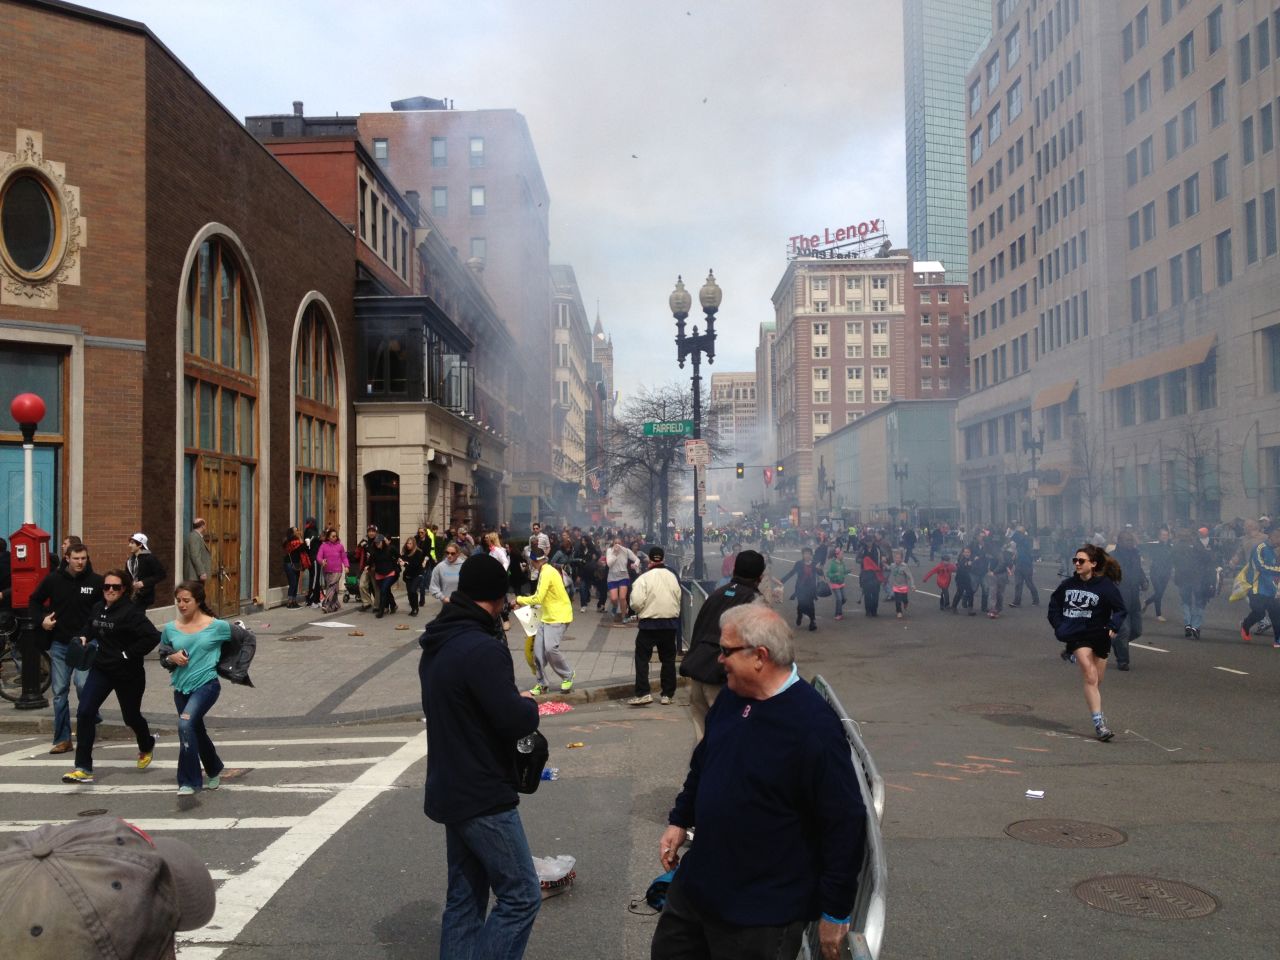 FBI Suspect No. 2, later said to be Dzhokhar Tsarnaev, is apparently seen in this picture, far left in white cap. The photo was taken by Boston Marathon runner David Green at the scene of the bombings.